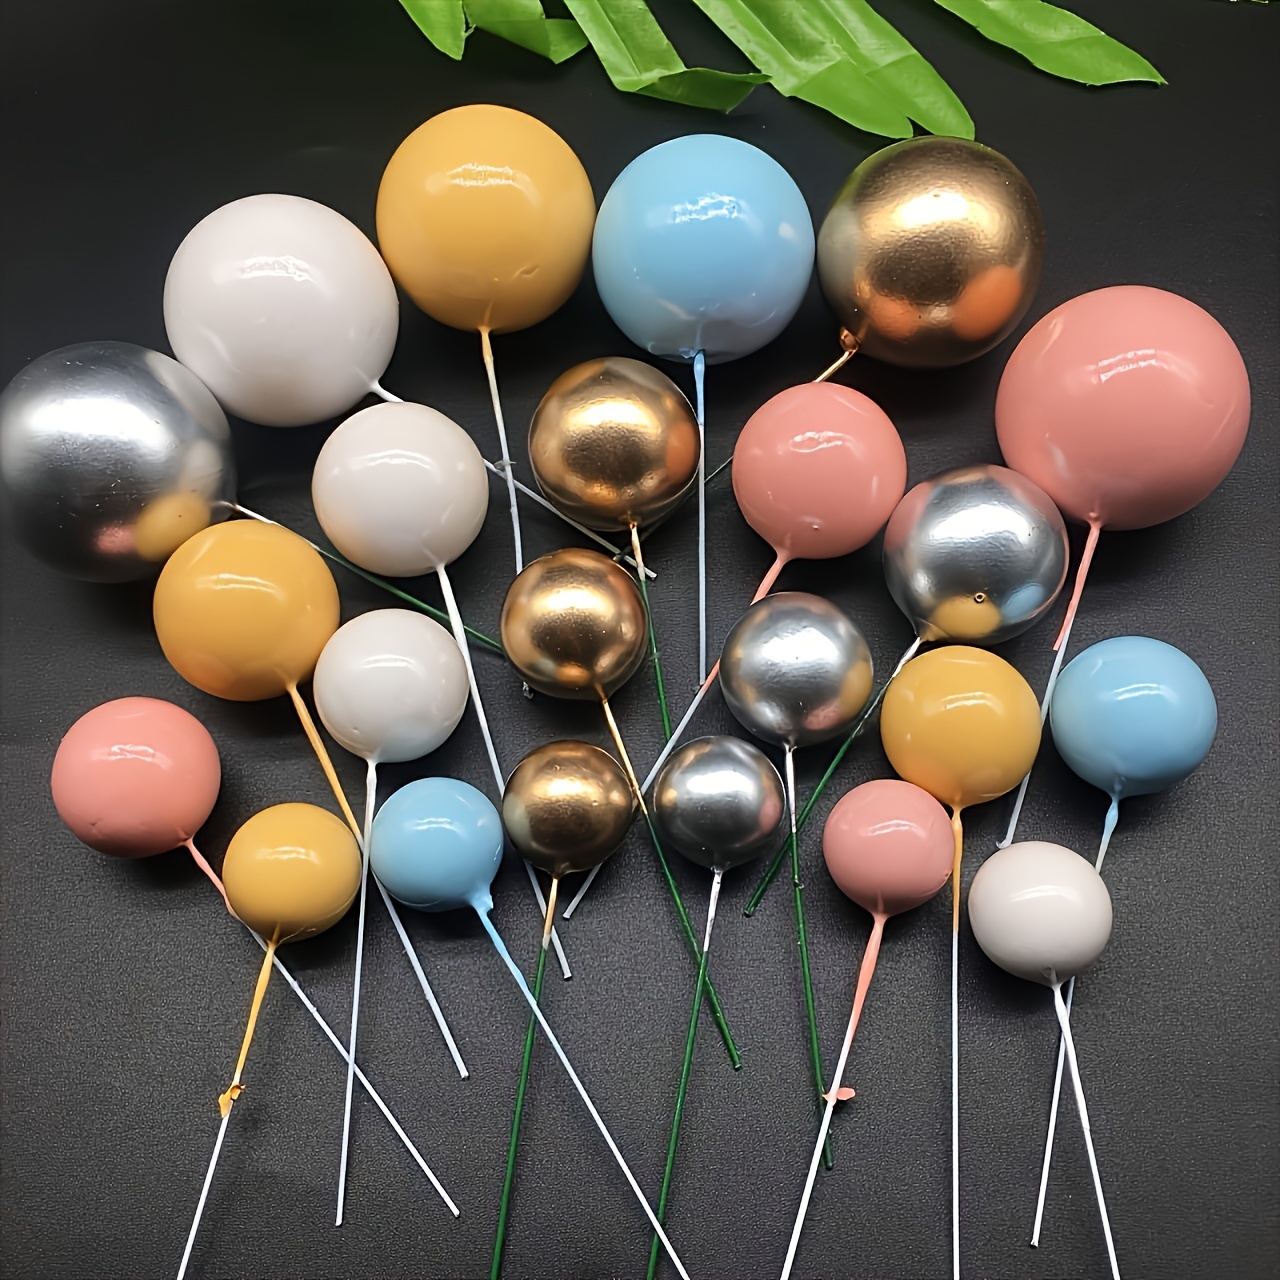 

30 Pieces Colorful Cake Balls, Baking And Dessert Table Decorations, Suitable For Romantic Birthday Parties And Banquets, Weddings, New Year, Valentine's Day, Carnivals, Cake Decorations Easter Gift